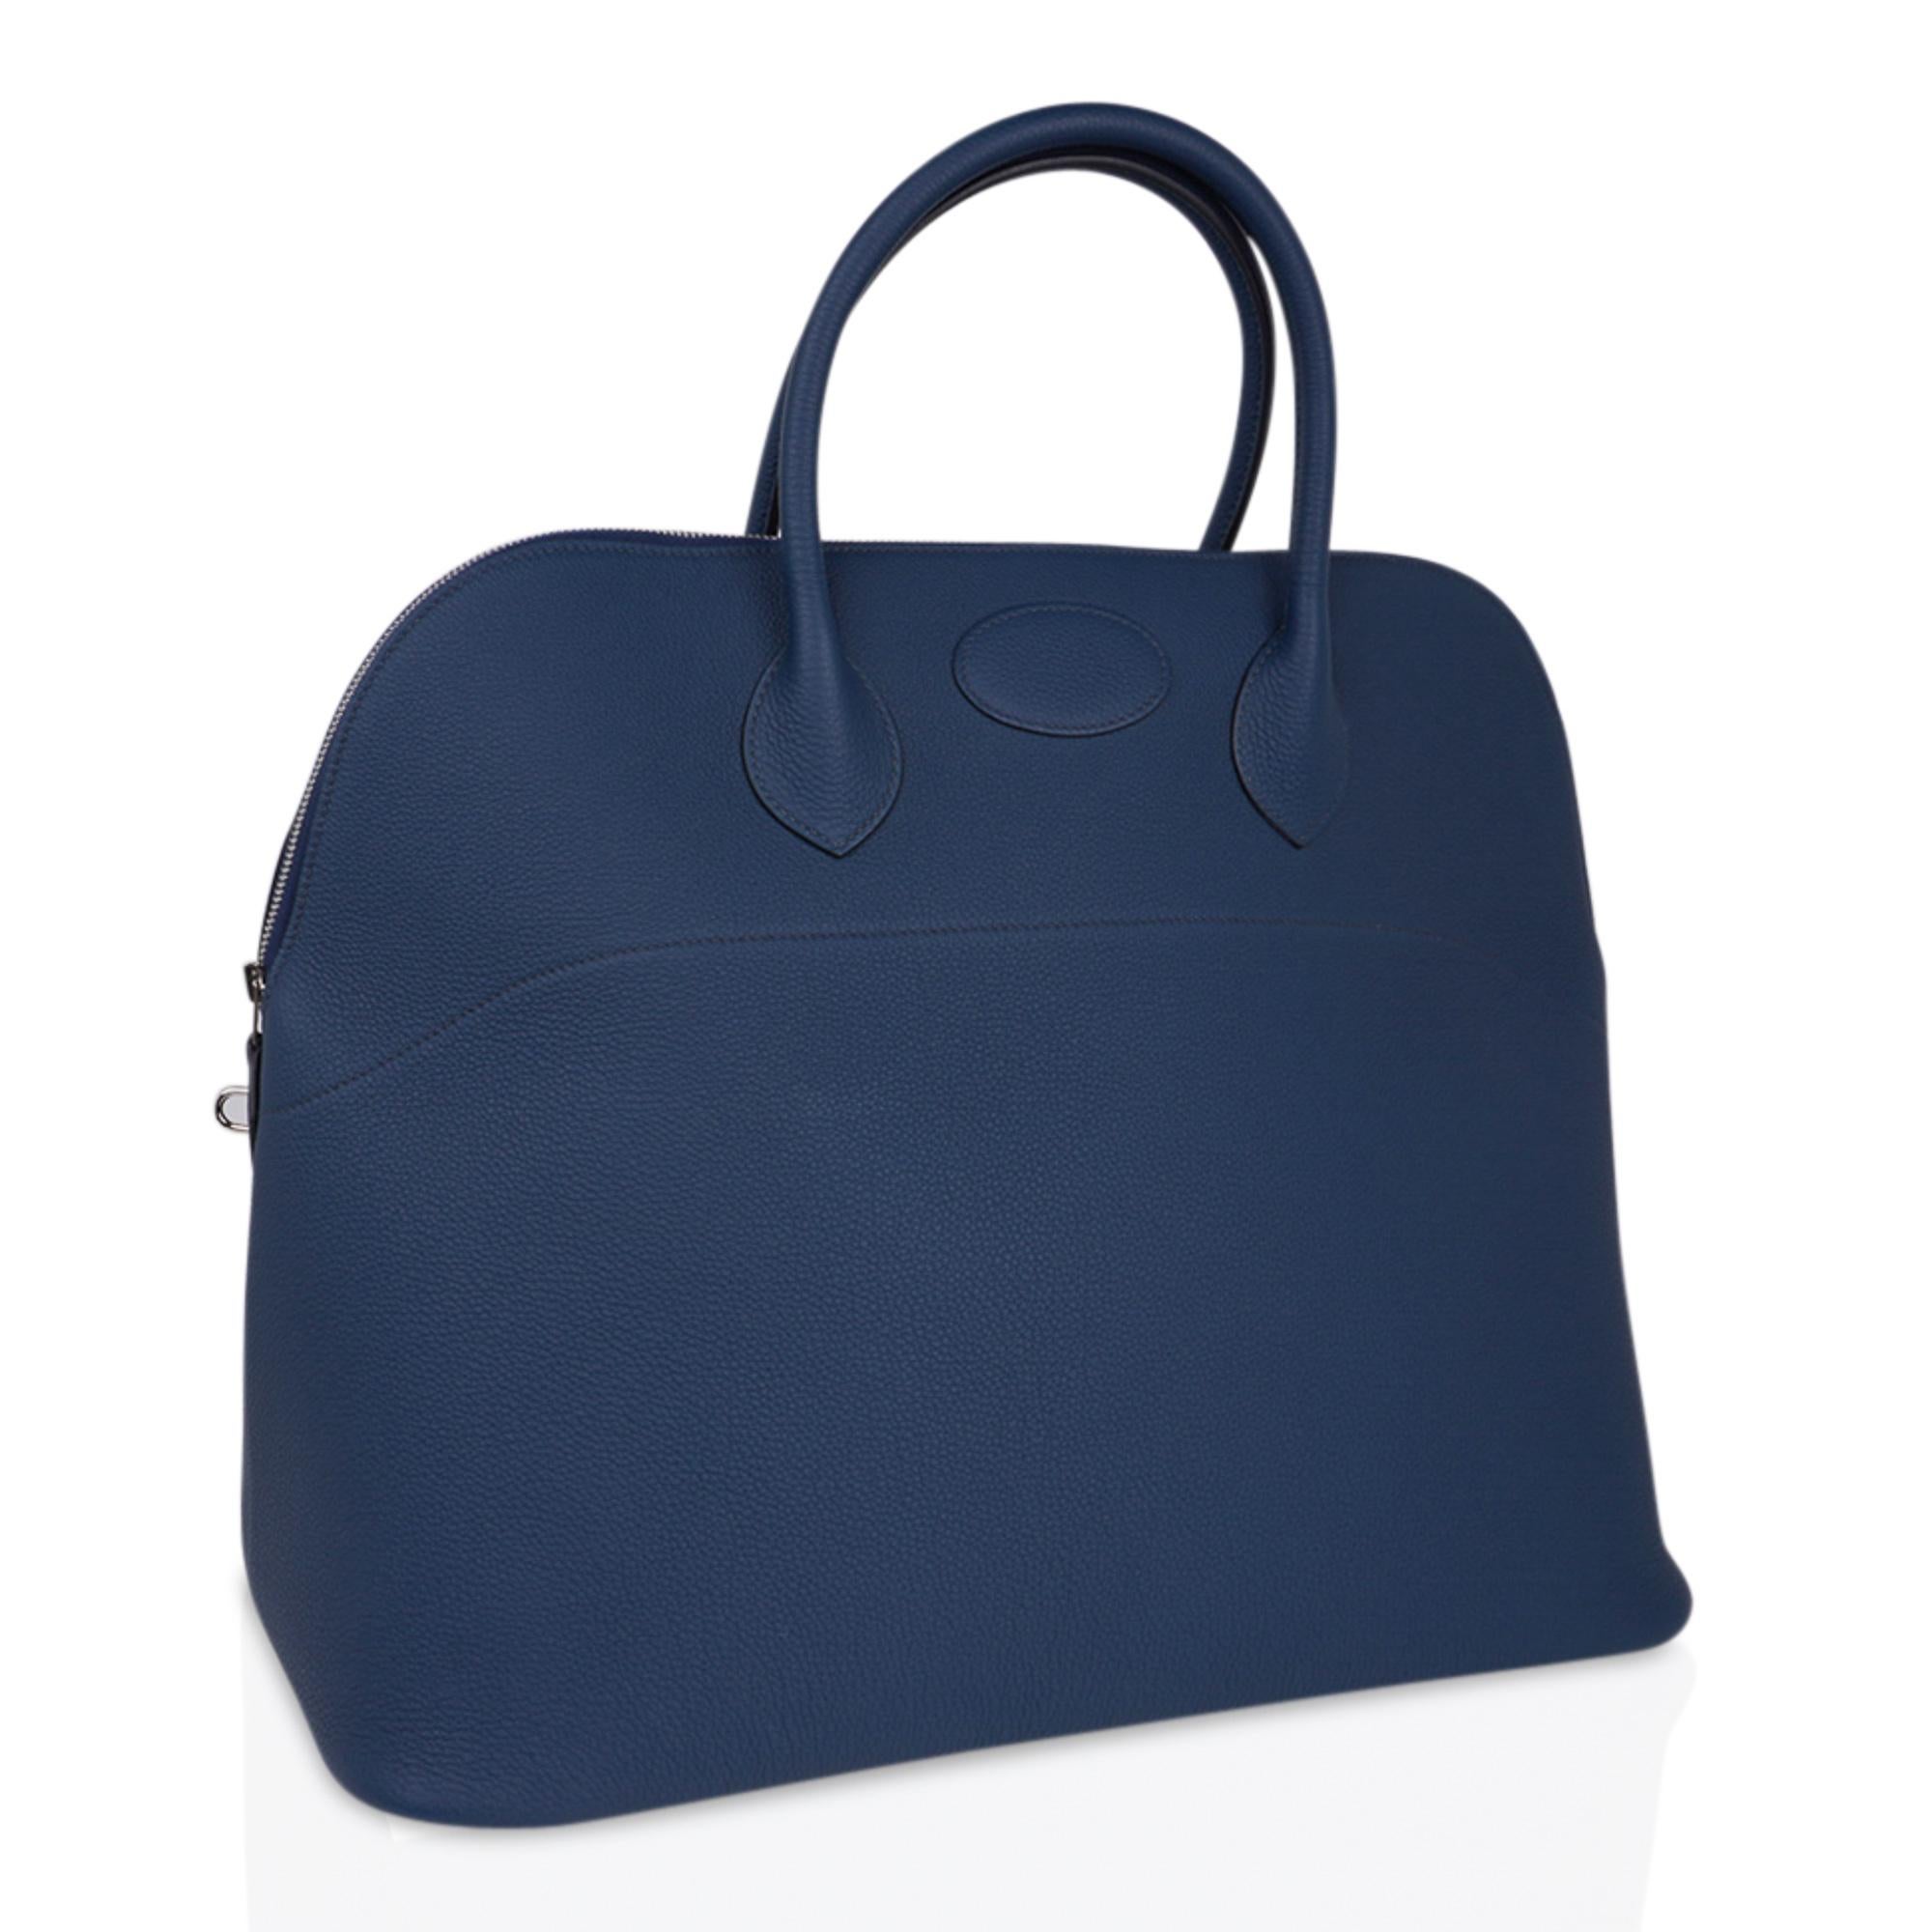 Mightychic offers an Hermes 45 Bolide featured in Blue de Prusse.
Crisp Palladium hardware.
The Weekender is featured in Togo leather, beautiful and scratch resistant.
Doubled rolled handles and top zip closure.
Interior is Toile
Comes with